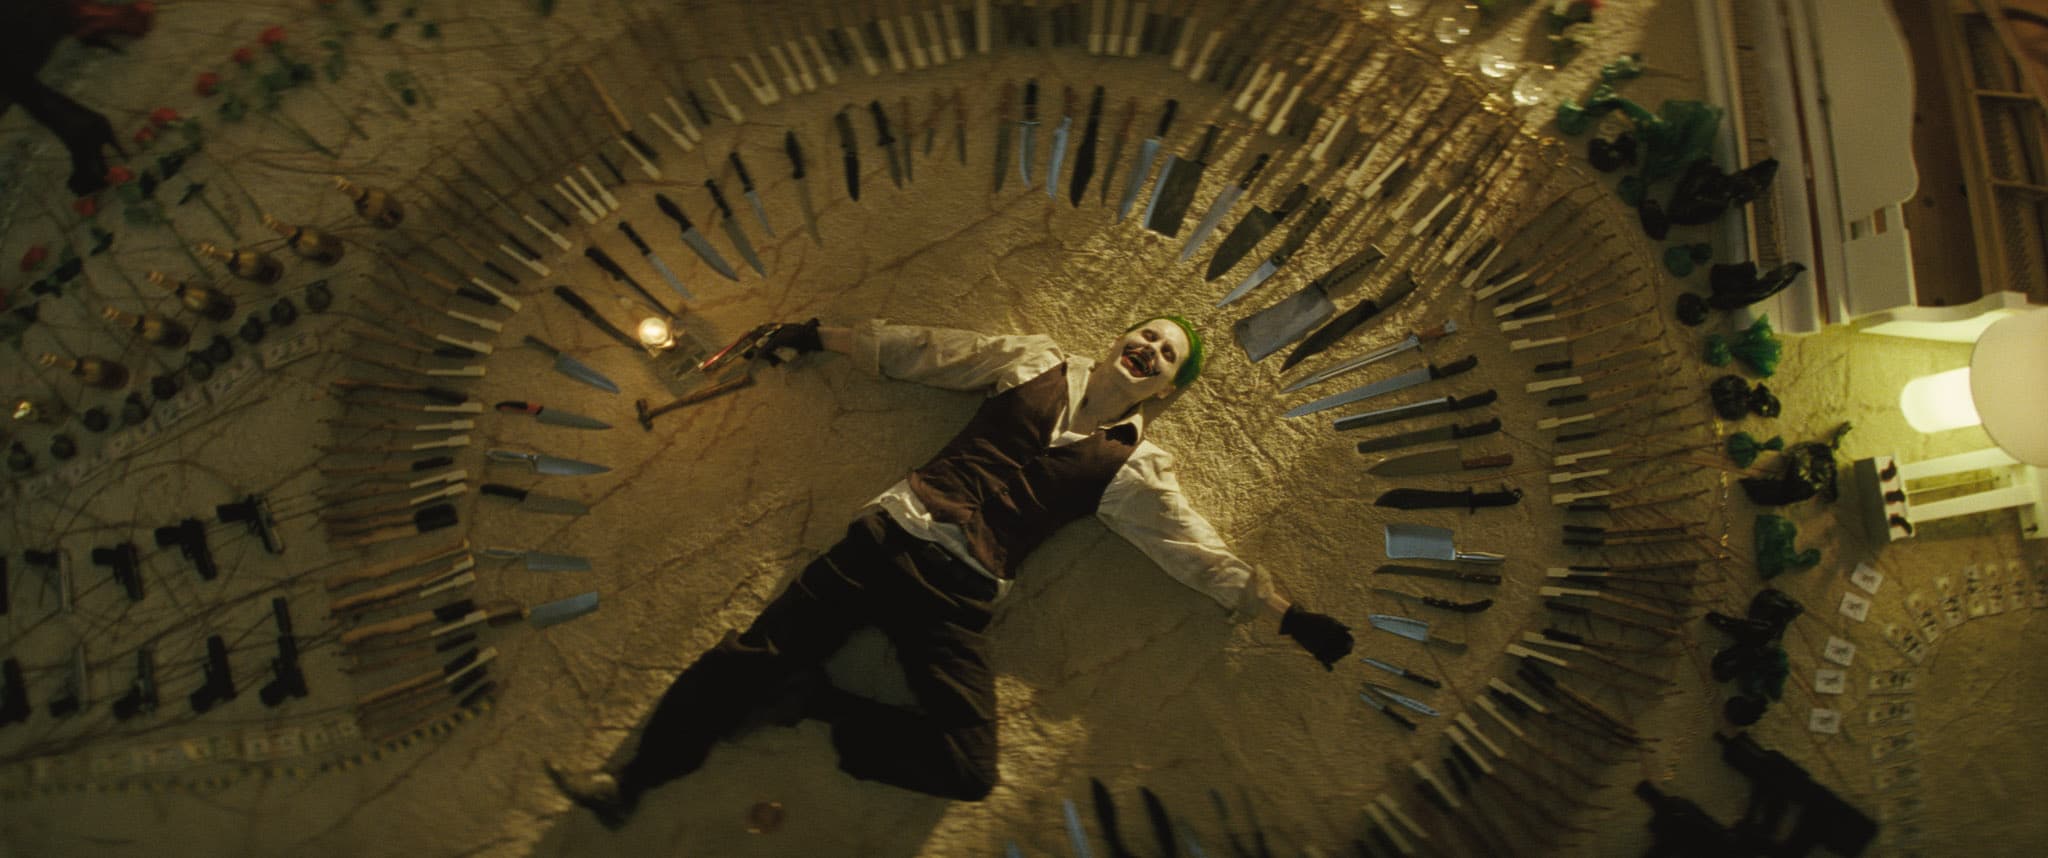 Watch A New Take of The Joker from David Ayer’s Suicide Squad